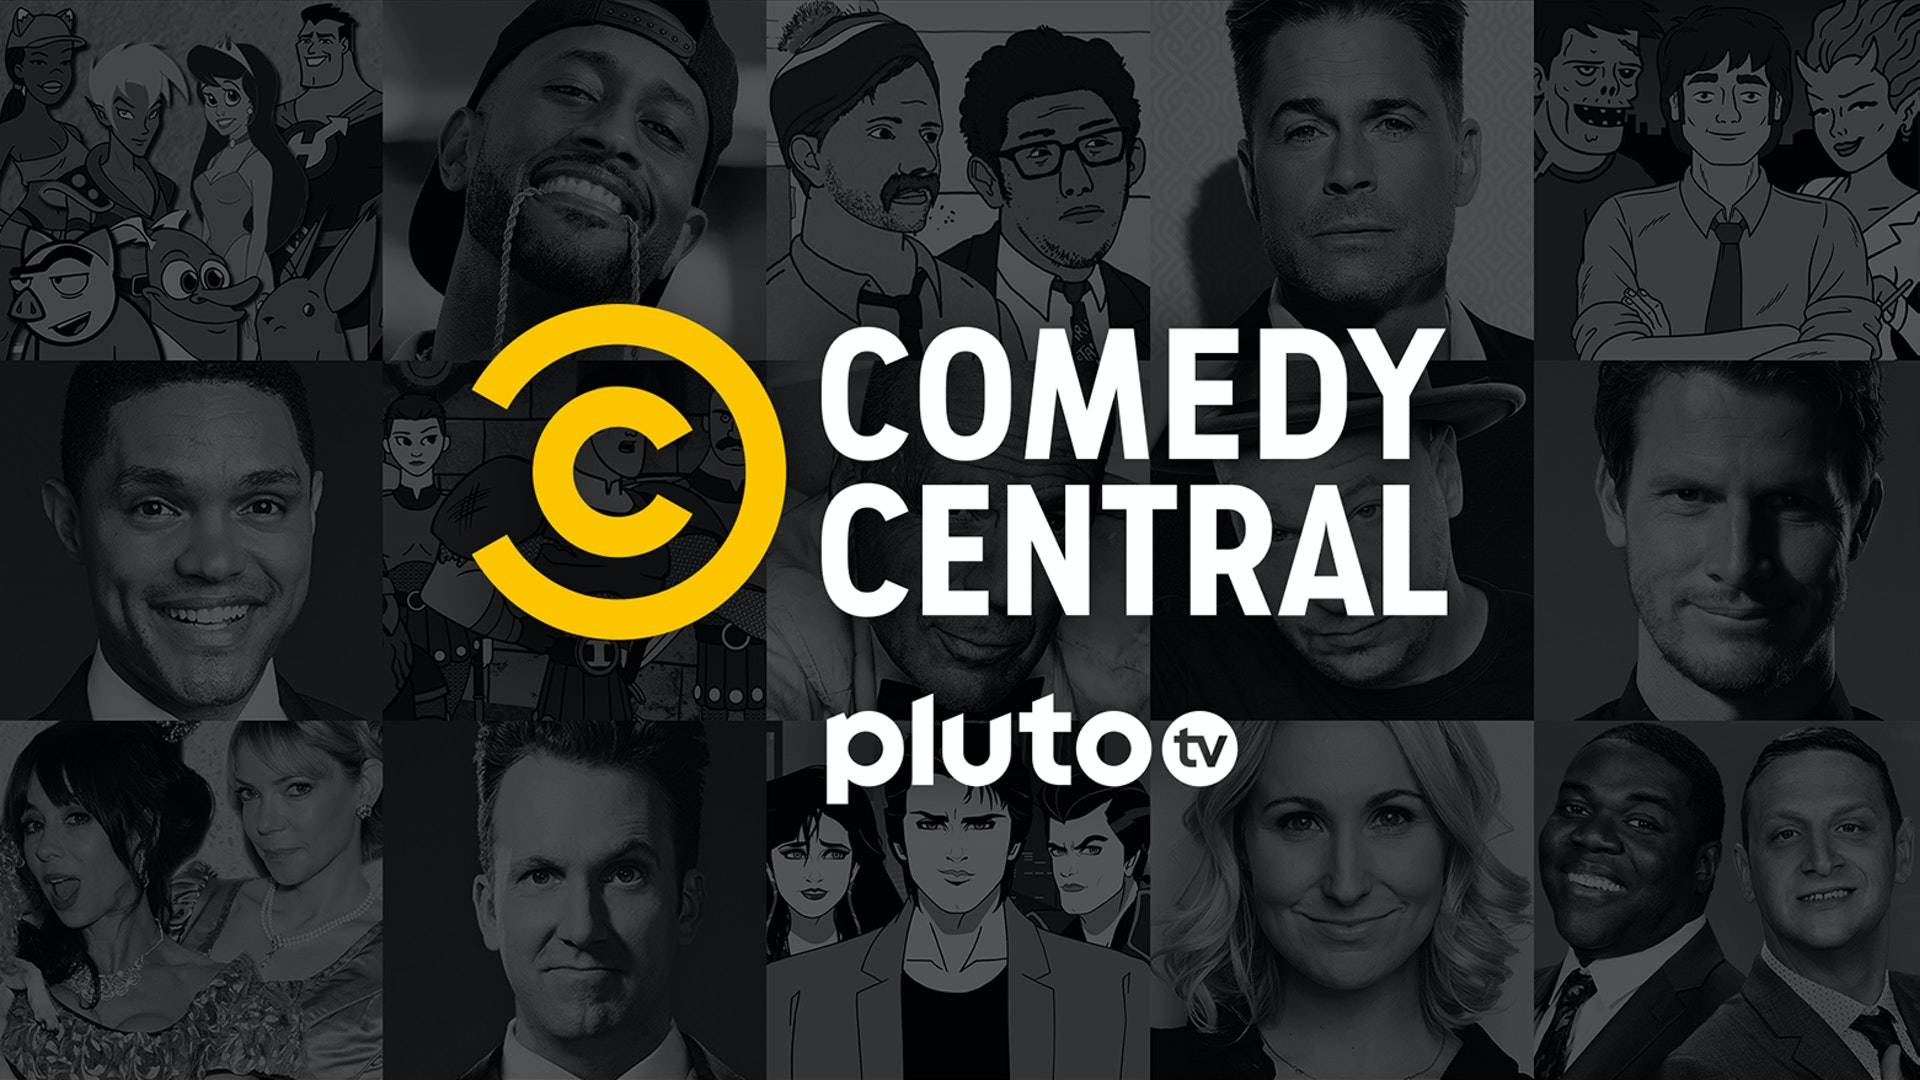 Watch The Comedy Central Channel On Pluto TV